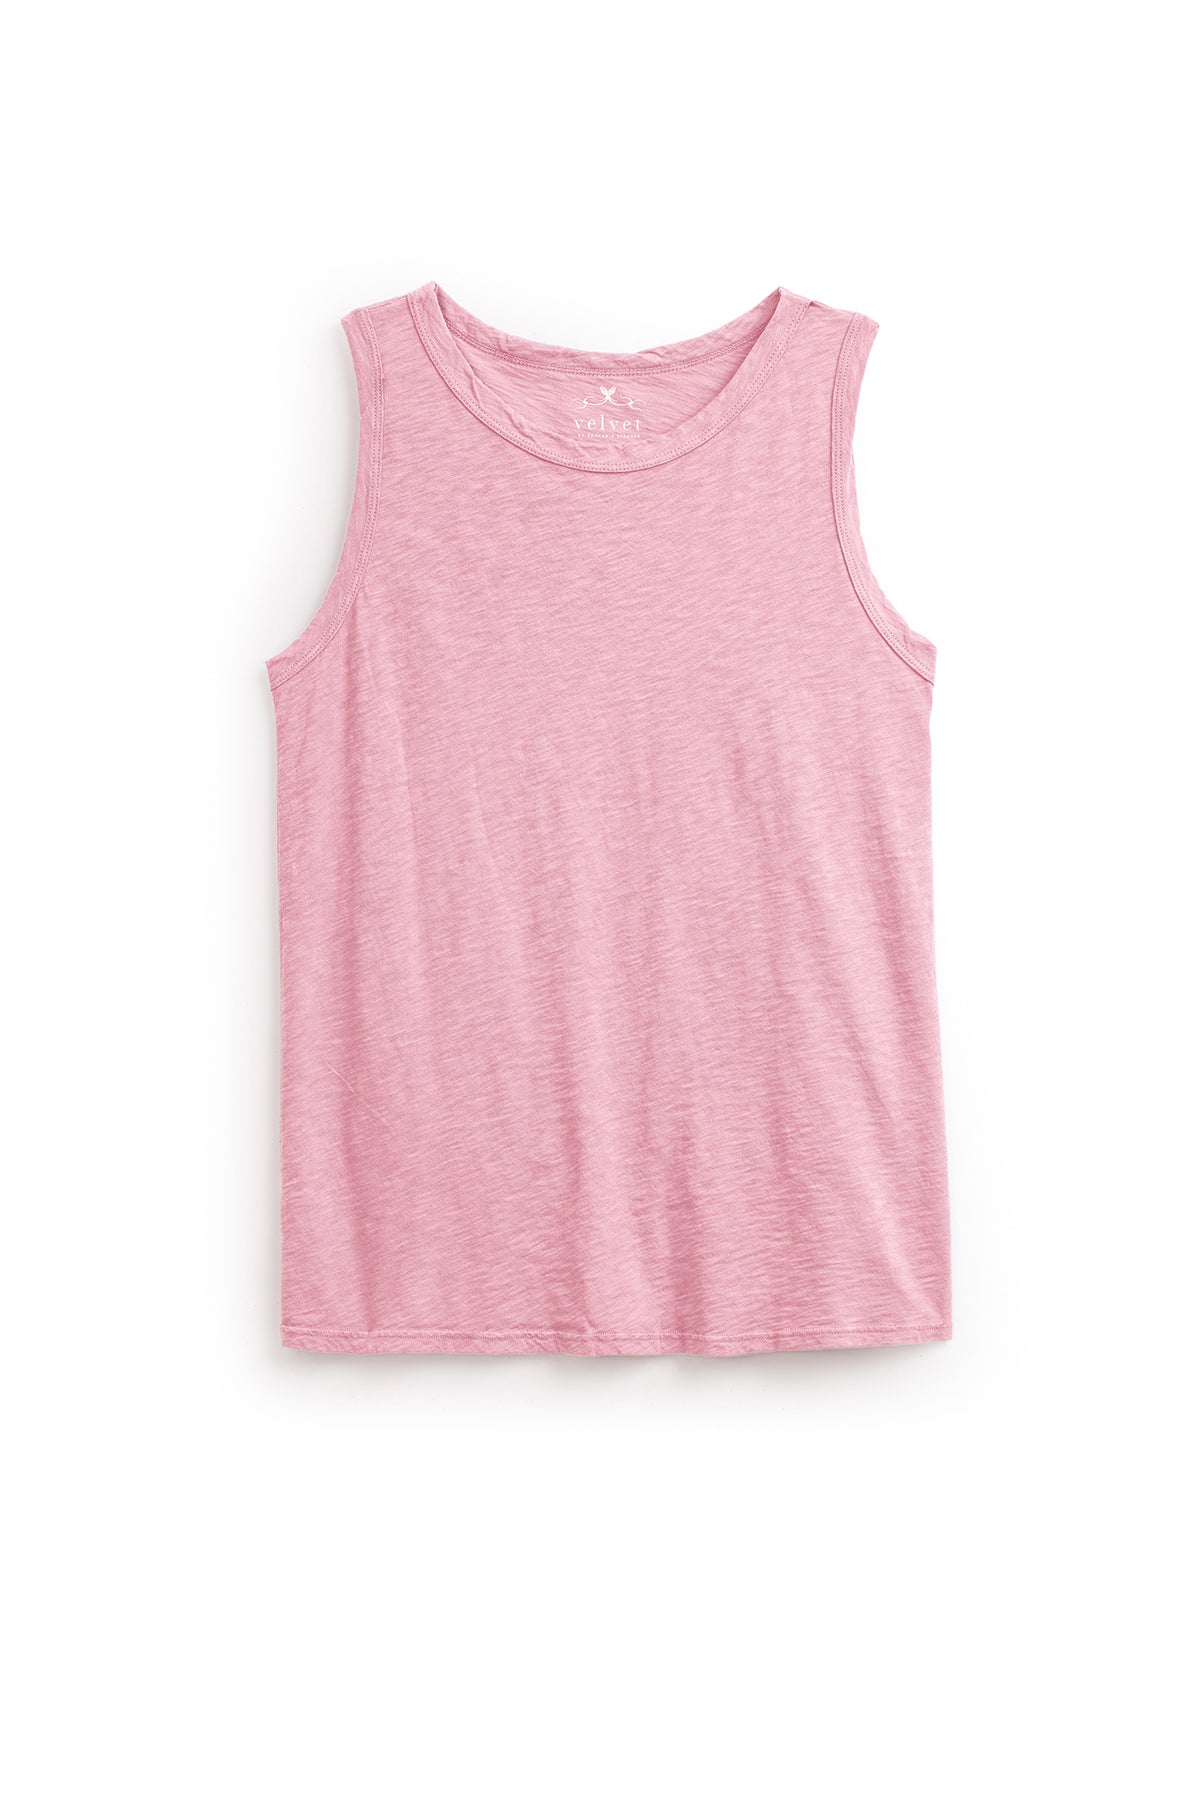 A TAURUS COTTON SLUB TANK by Velvet by Graham & Spencer on a white background with tomboy-inspired flair.-35982876704961